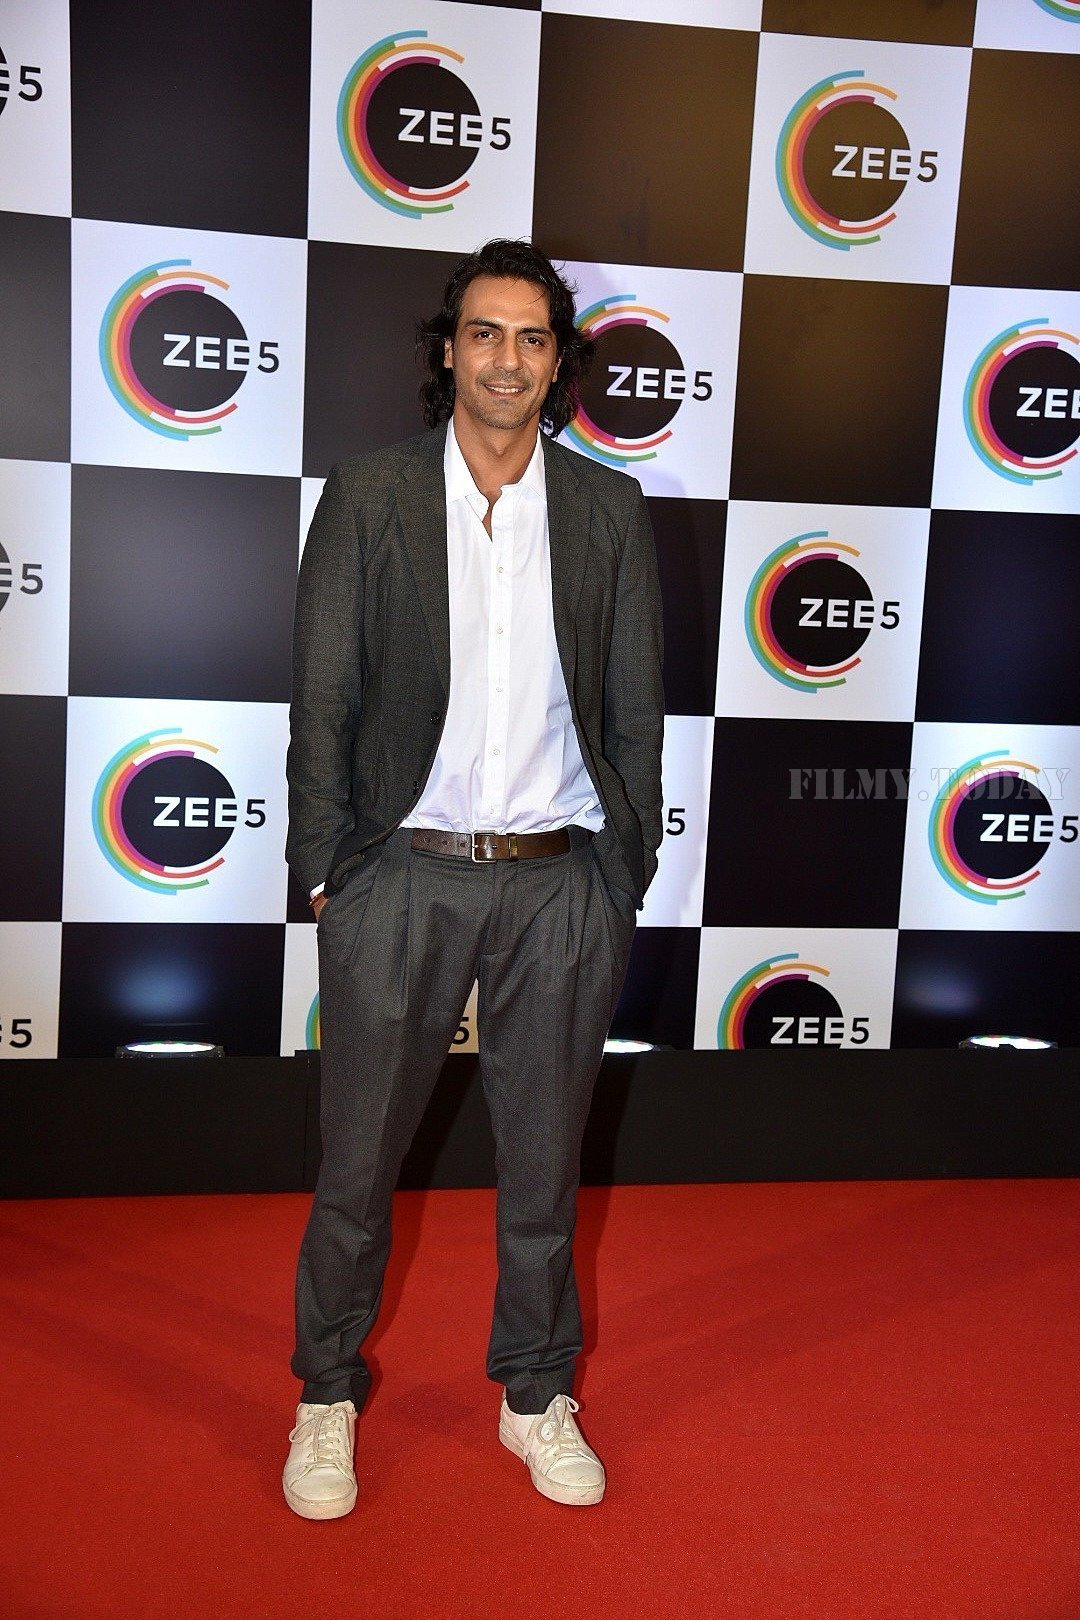 Arjun Rampal - Photos: Red Carpet Of 1 Year Anniversary Of Zee5 App | Picture 1627475